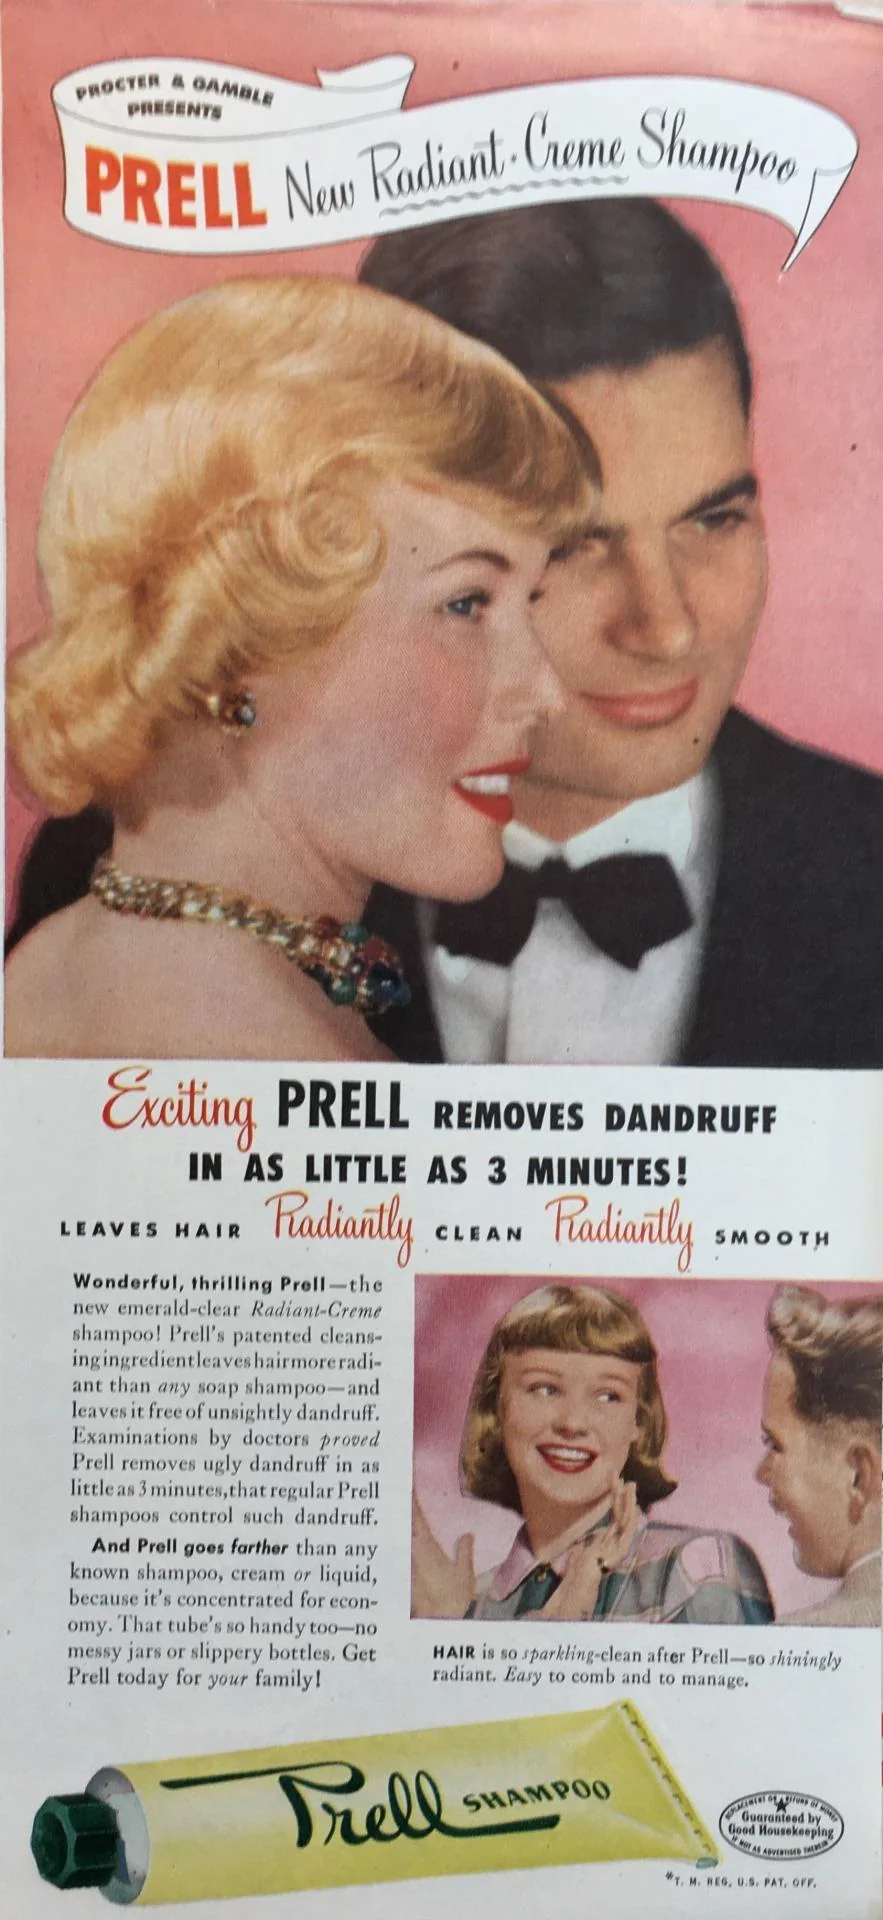 Exeting PRELL REMOVES DANDRUF IN AS LITTLE AS 3 MINUTES! LEAVES HAIR Radiantly, cian Padiaily snoor